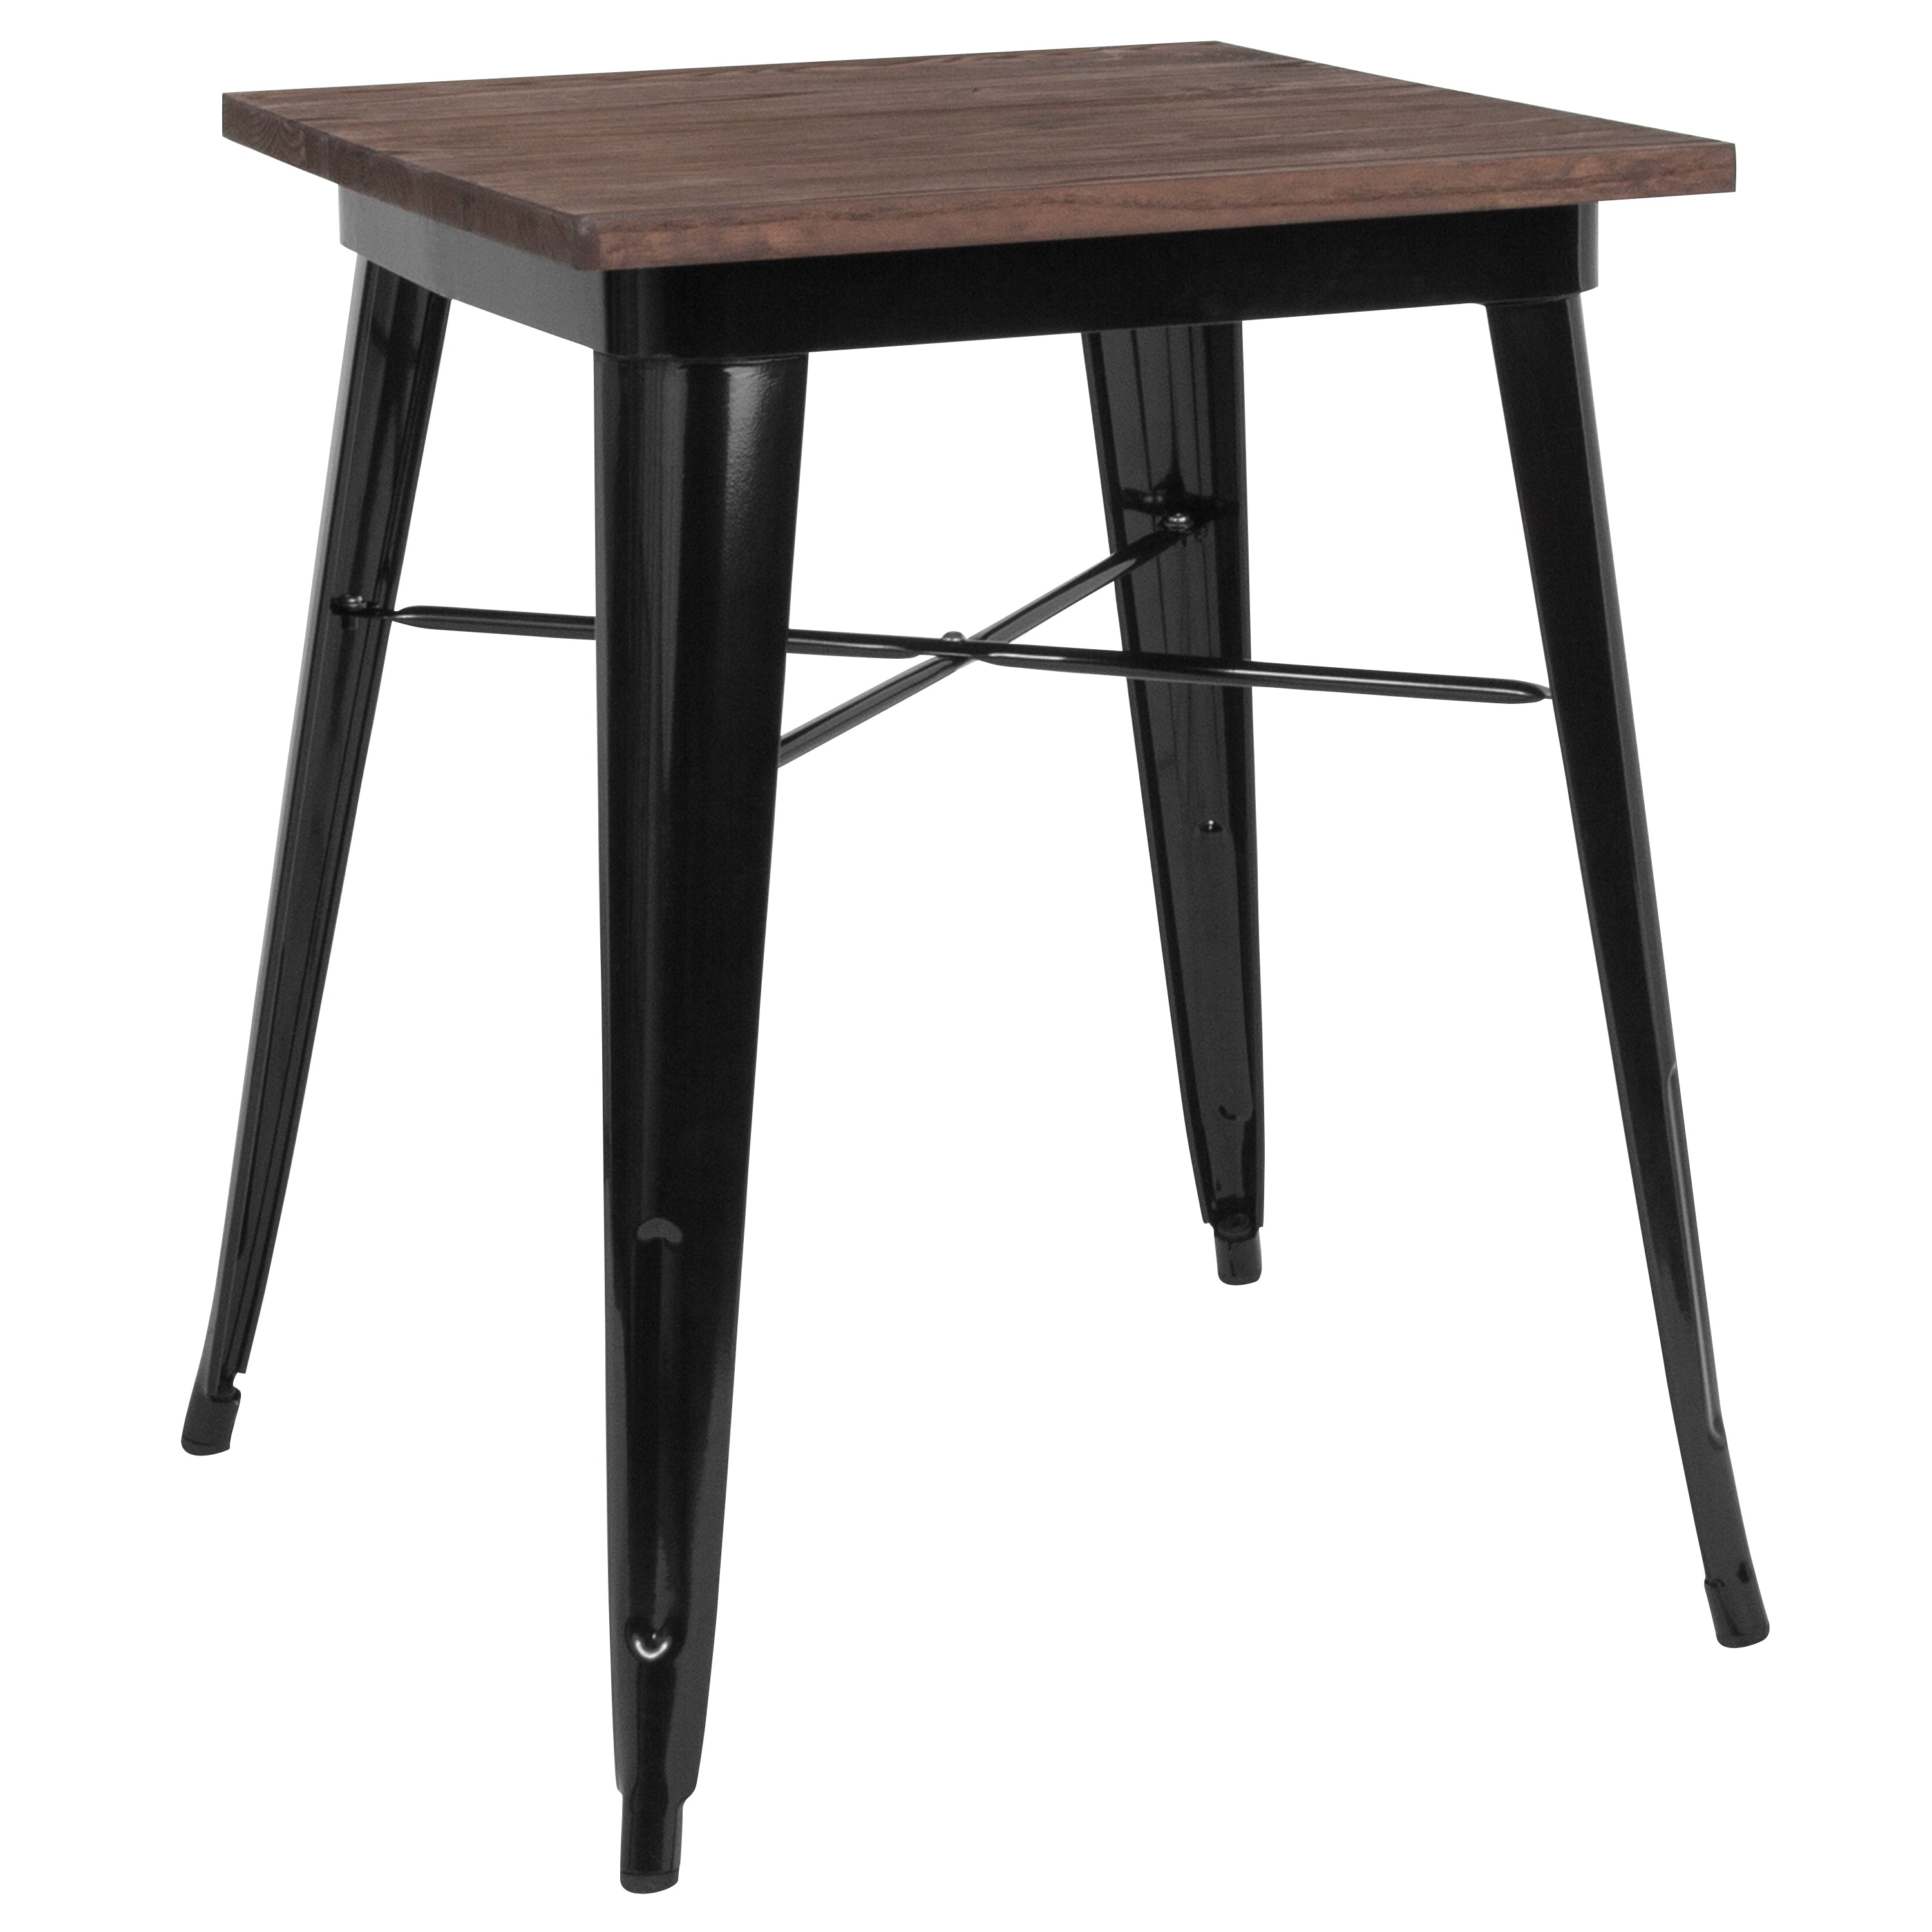 23.5" Square Metal Indoor Table with Rustic Wood Top-Metal/ Colorful Restaurant Table-Flash Furniture-Wall2Wall Furnishings